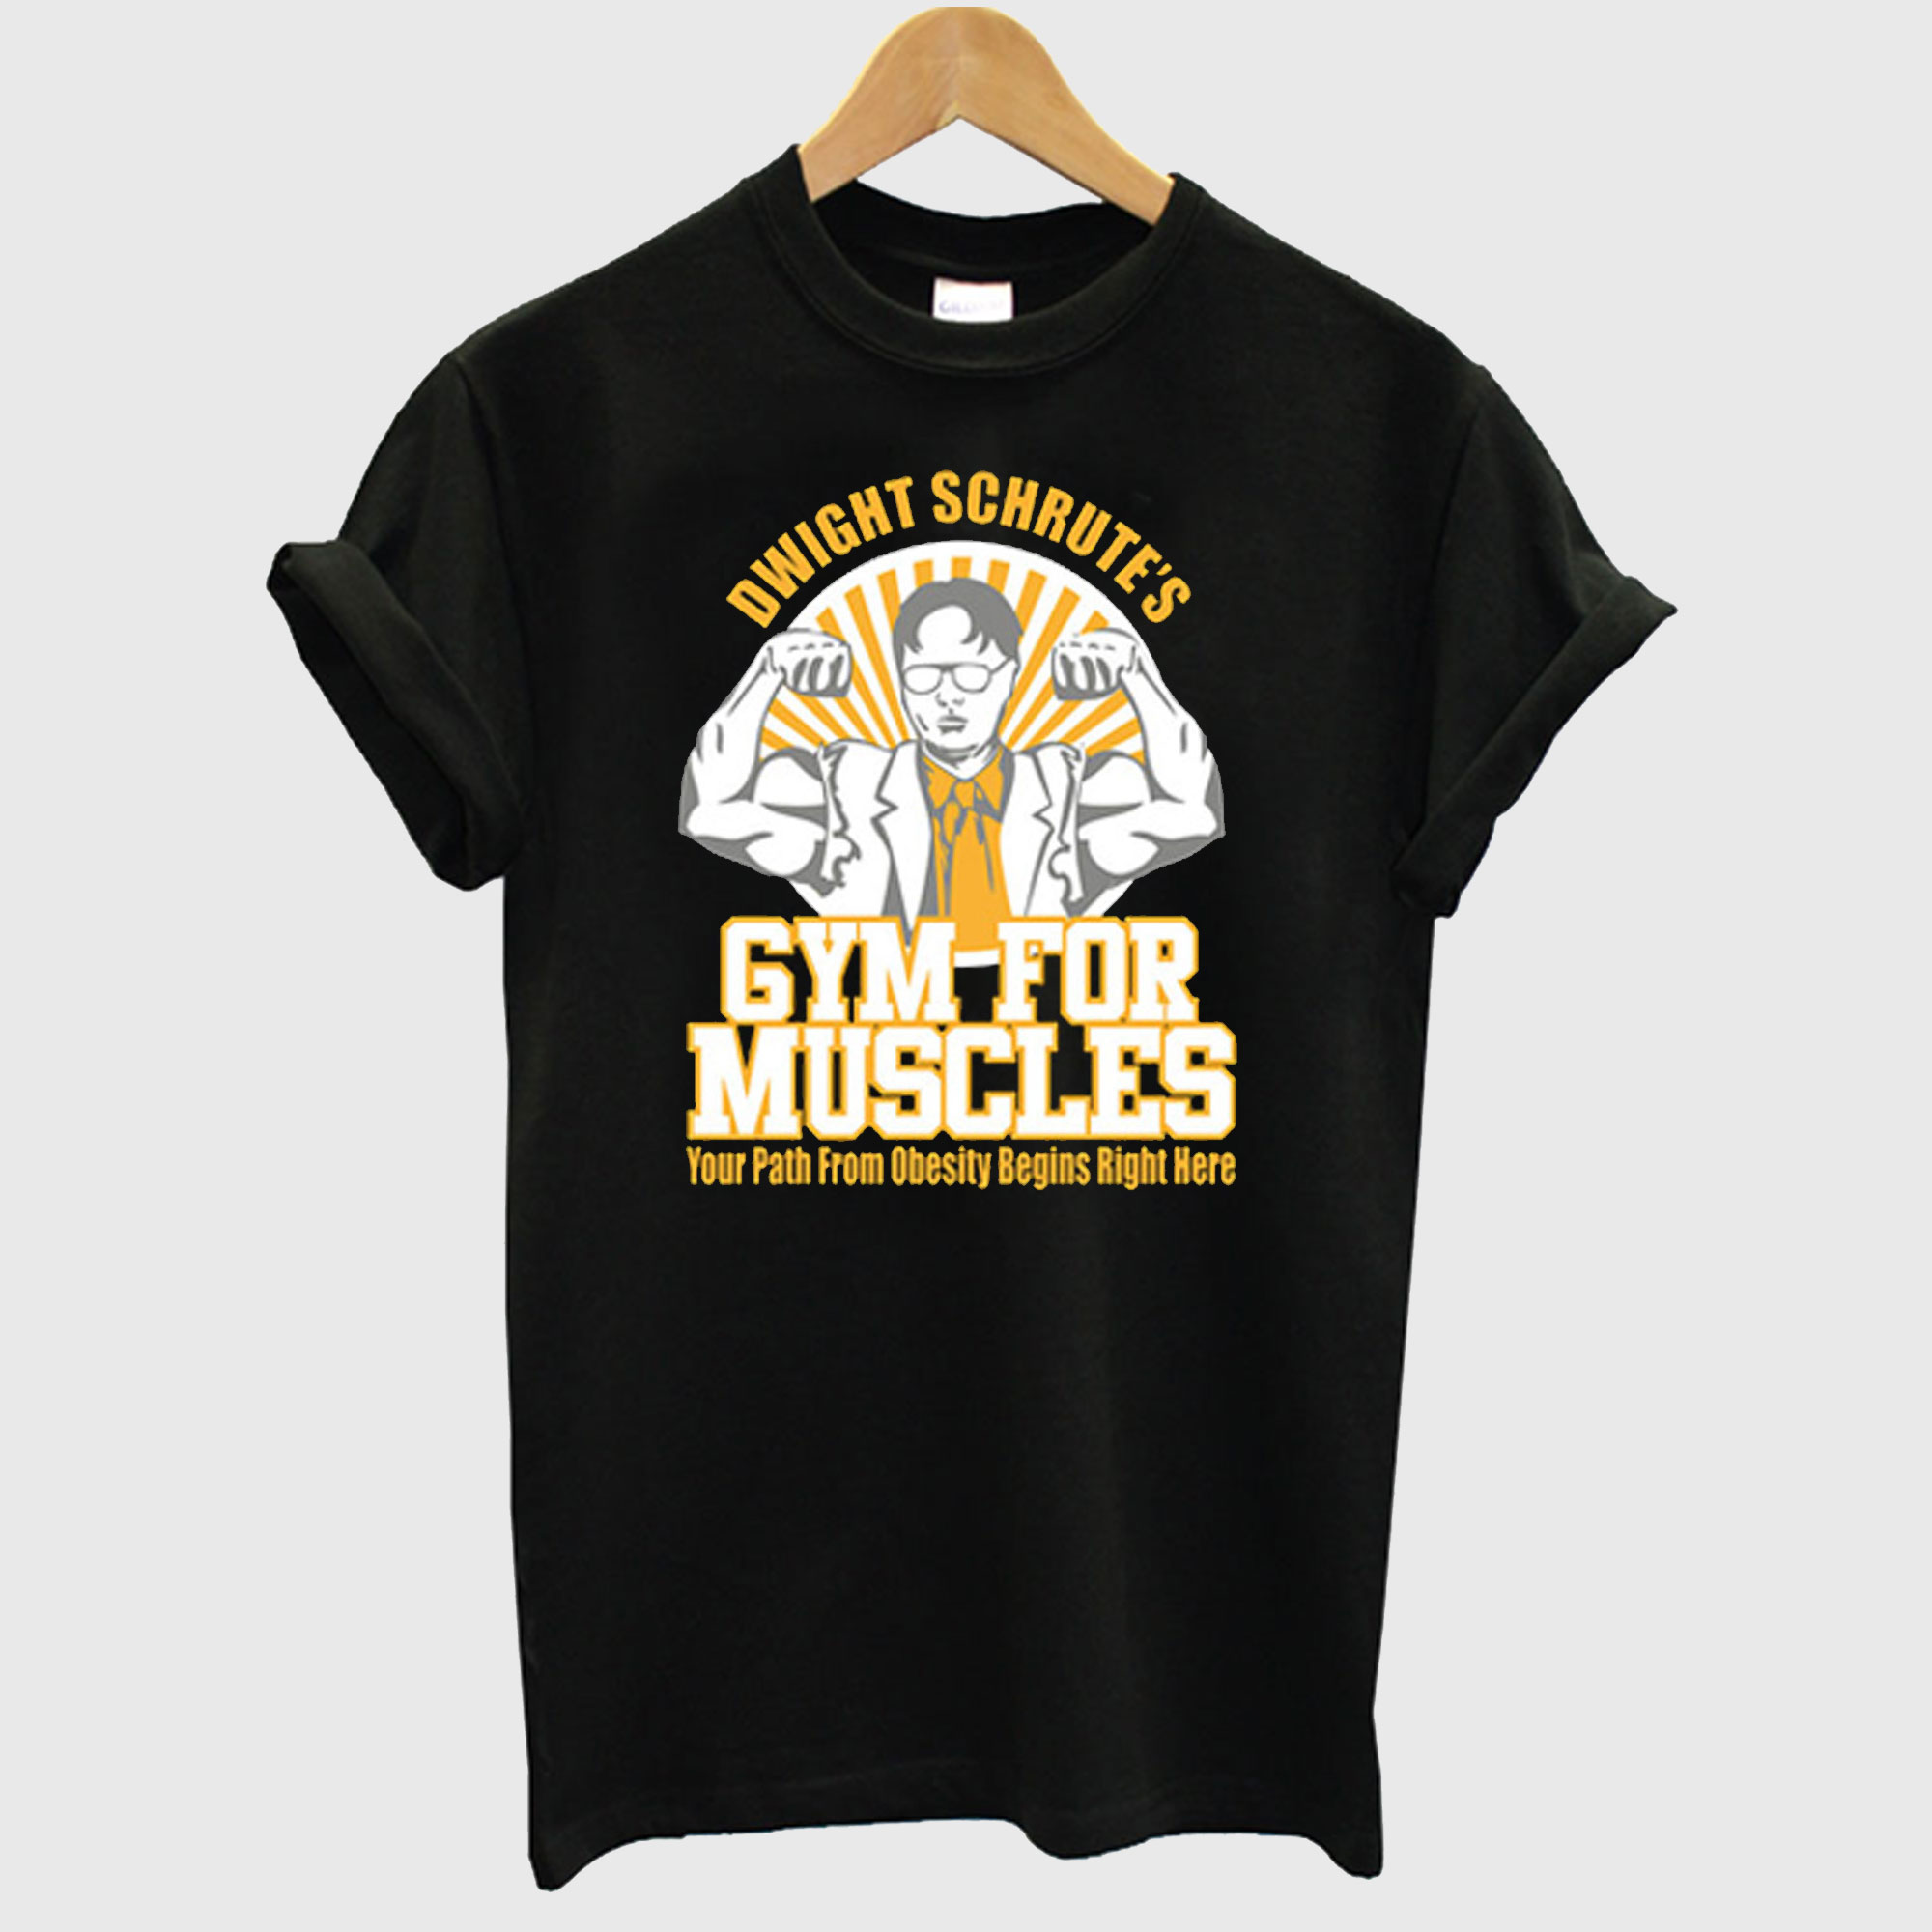 Dwight schrute's gym for muscles T Shirt